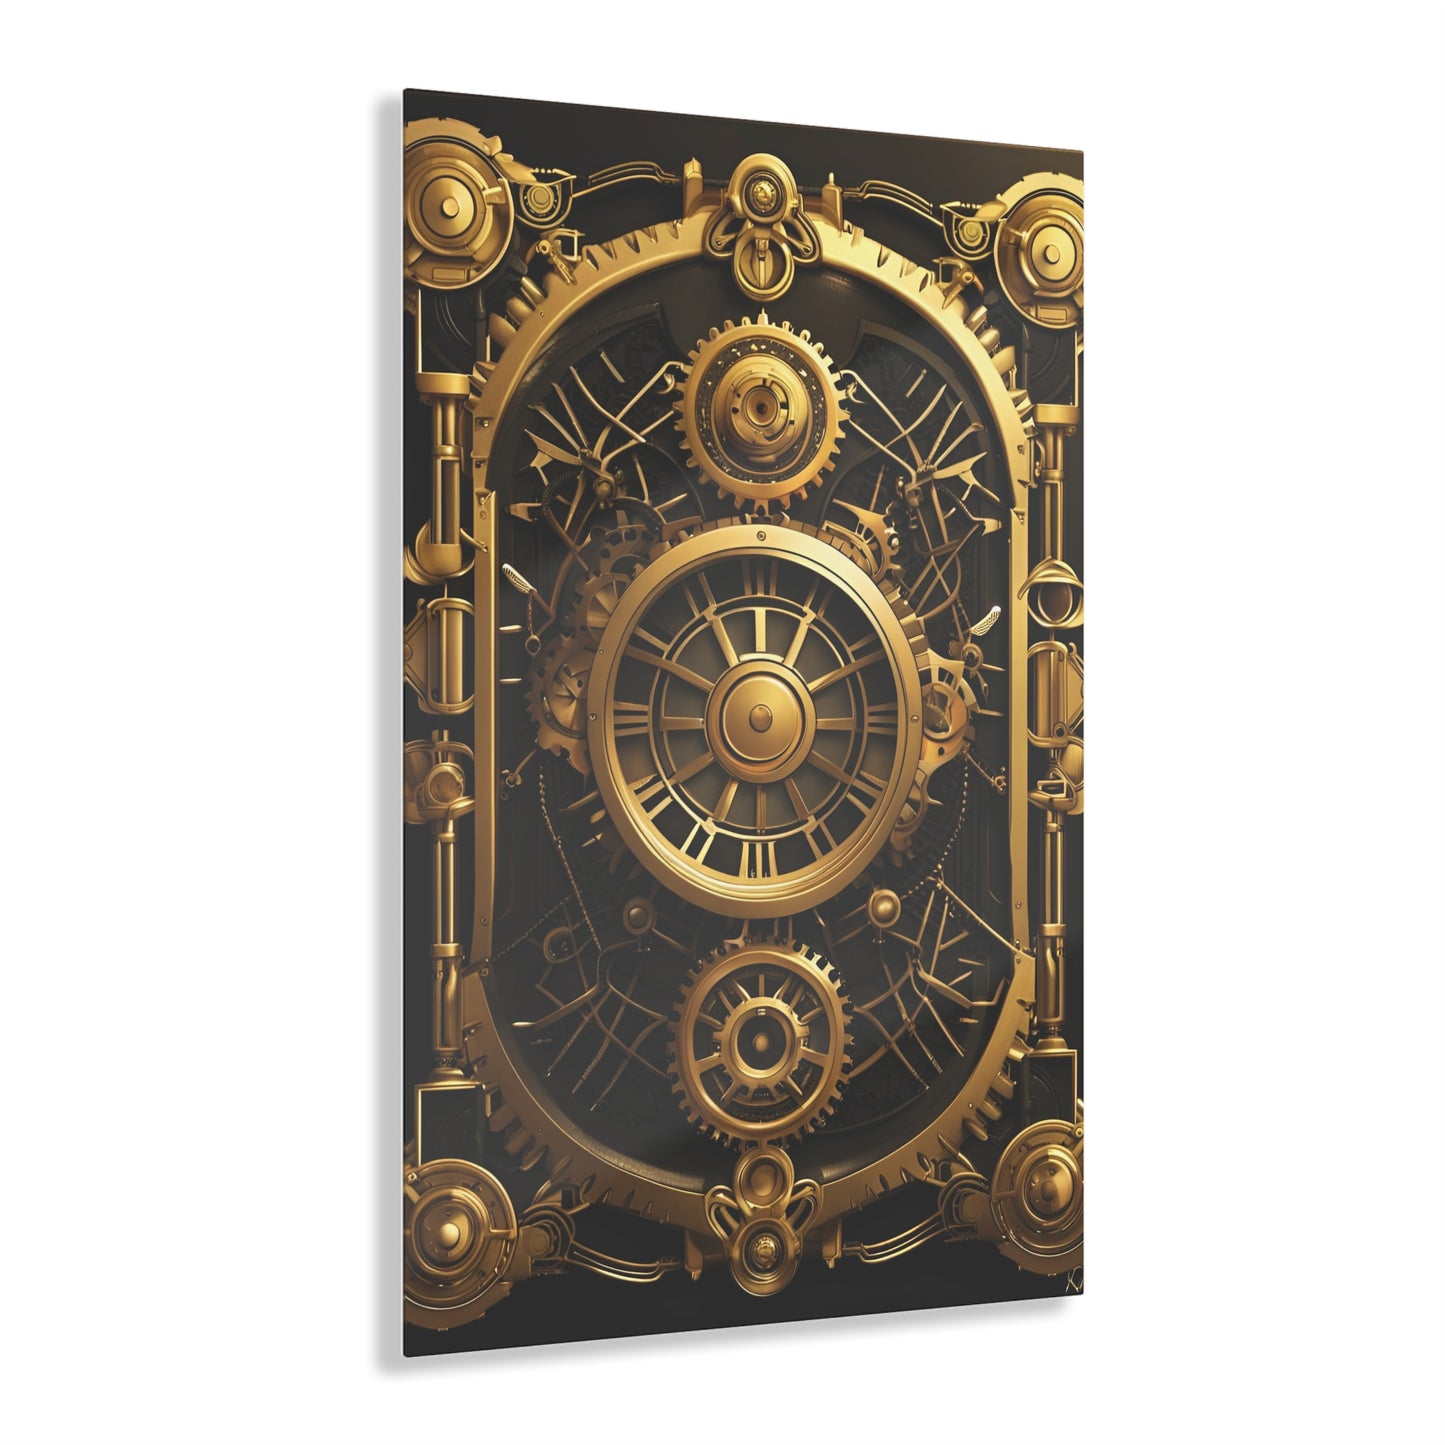 Art Deco themed steampunk gold and copper gears panel style printed on a crystal clear acrylic panel 24x36 hung